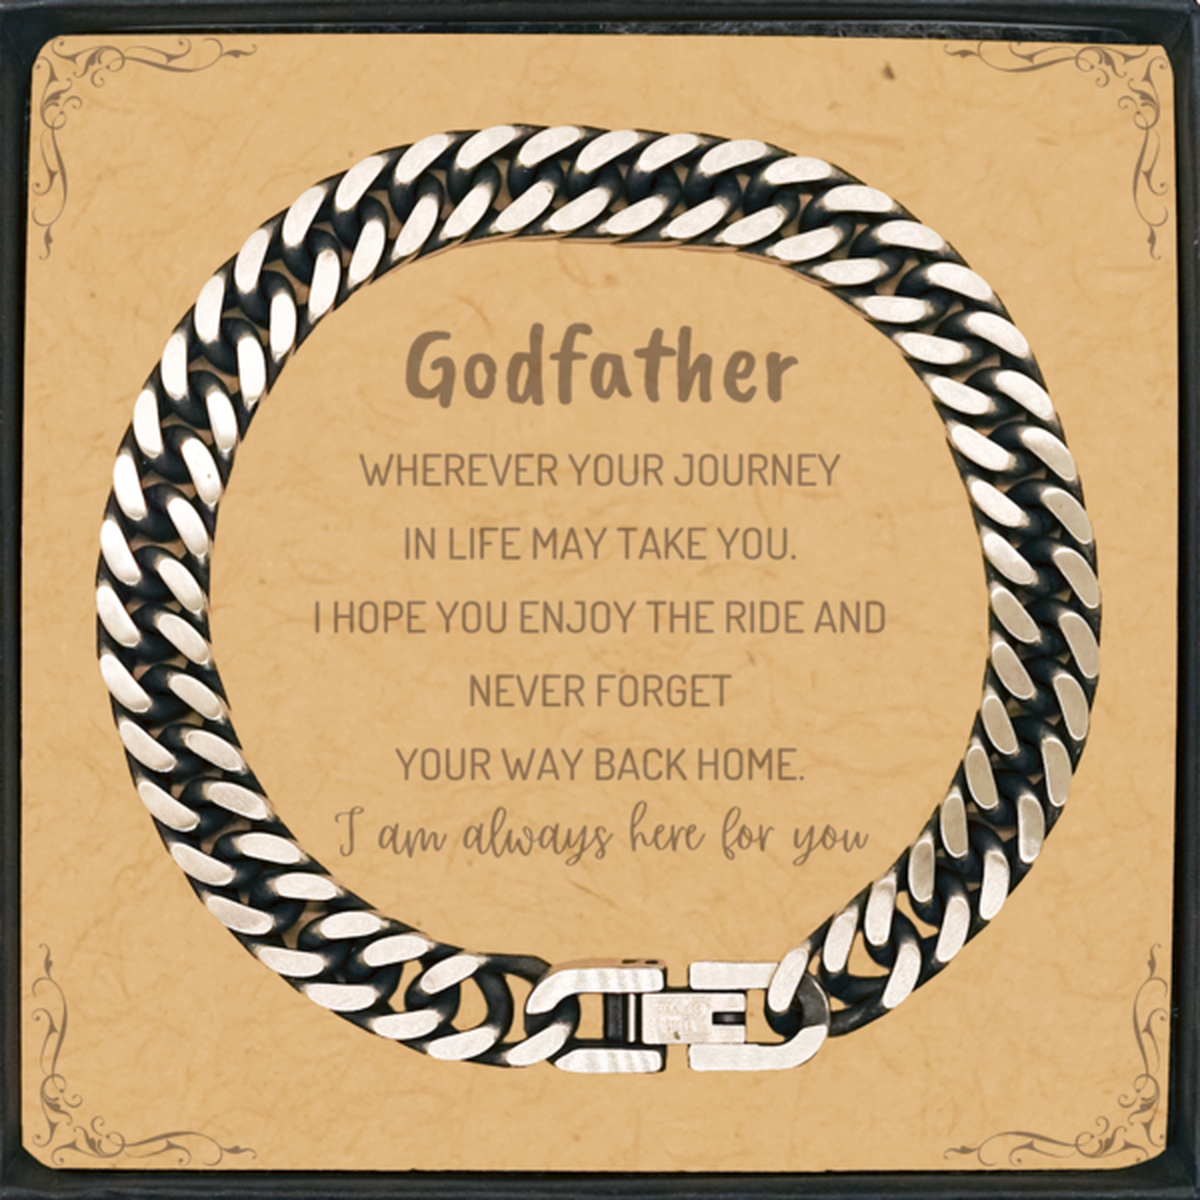 Godfather wherever your journey in life may take you, I am always here for you Godfather Cuban Link Chain Bracelet, Awesome Christmas Gifts For Godfather Message Card, Godfather Birthday Gifts for Men Women Family Loved One